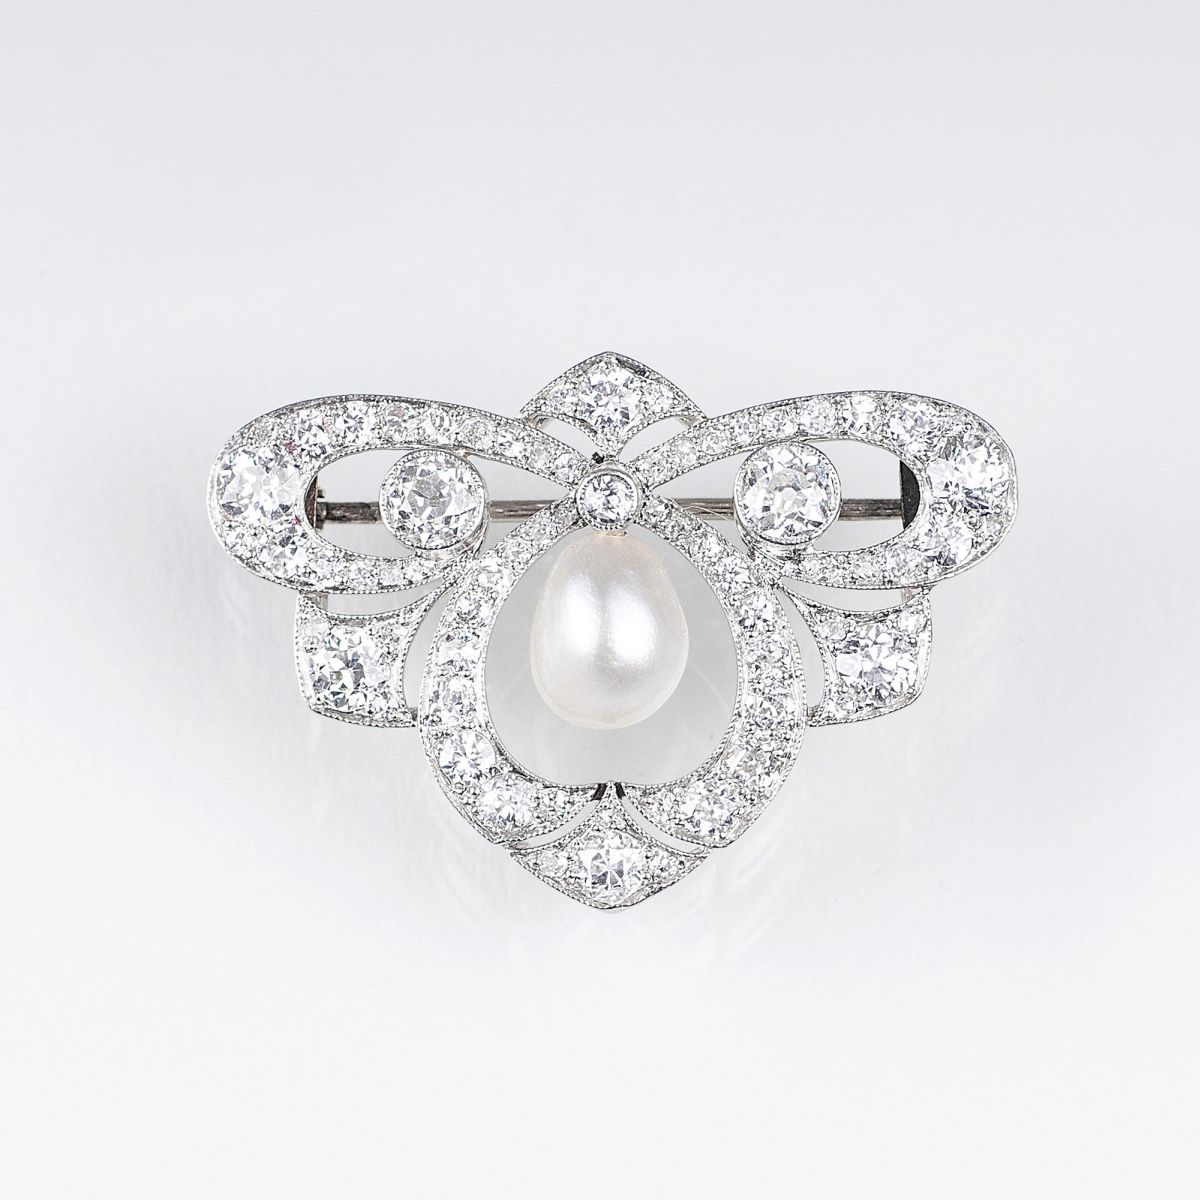 An Art Nouveau Diamond Brooch with Natural Pearl